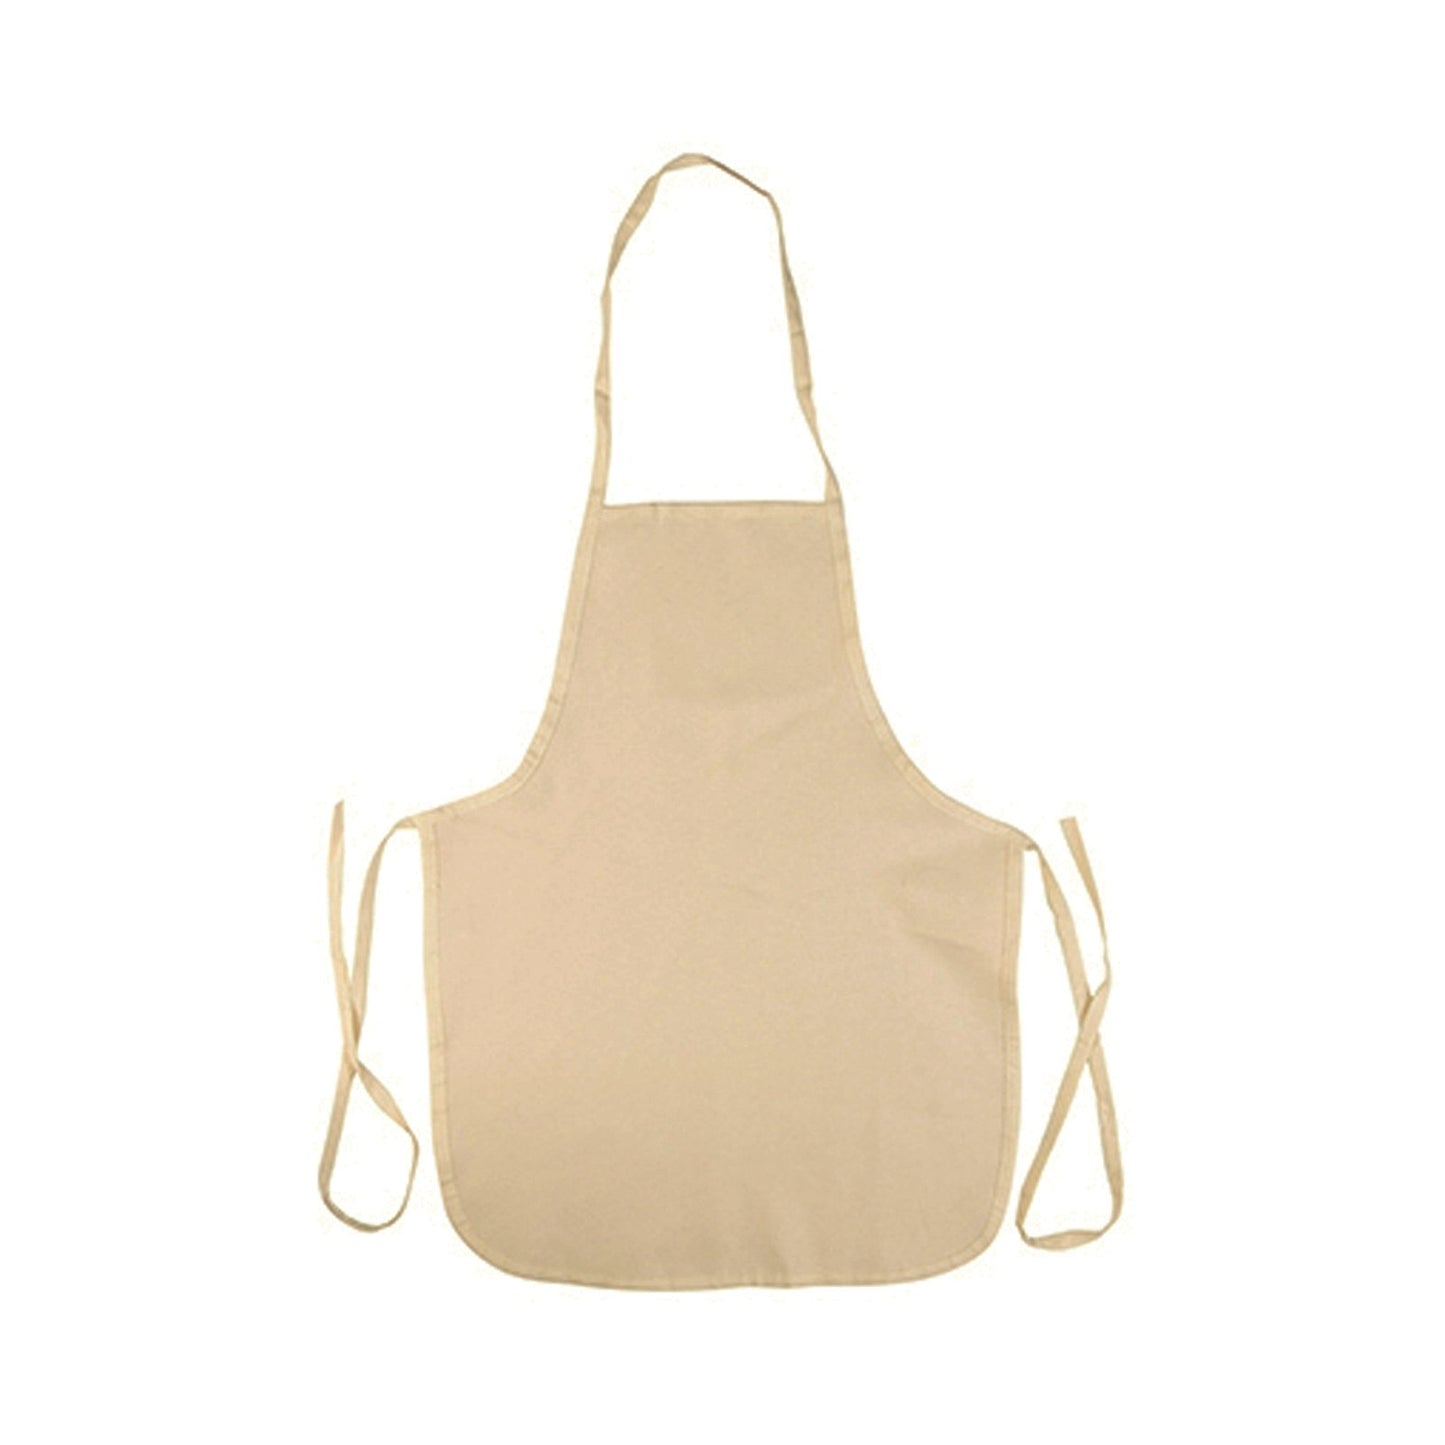 Personalised Canvas Apron with Lion Olive Branch and Name Design